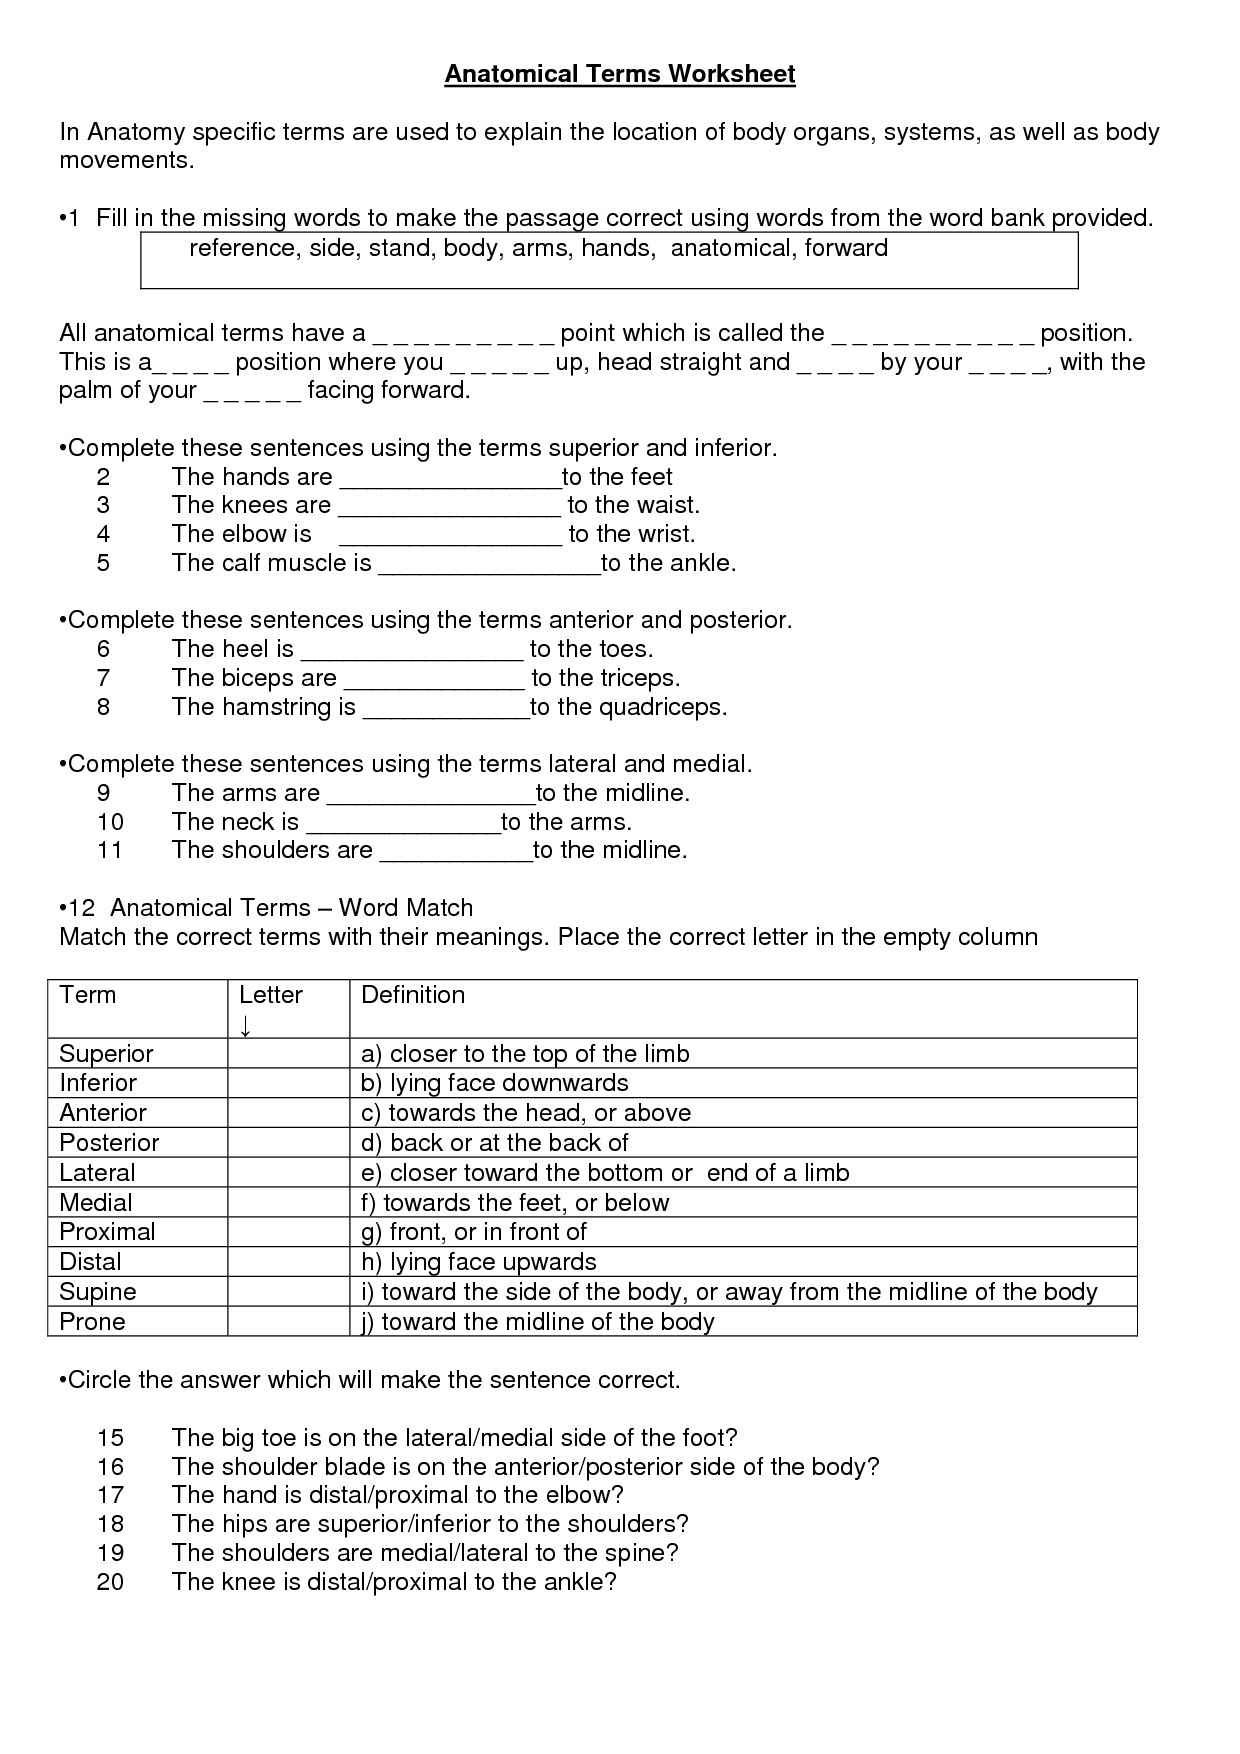 Directional Terms Worksheet Anatomy Physiology Answers - Worksheet List
 Anatomy Directional Terms Worksheet